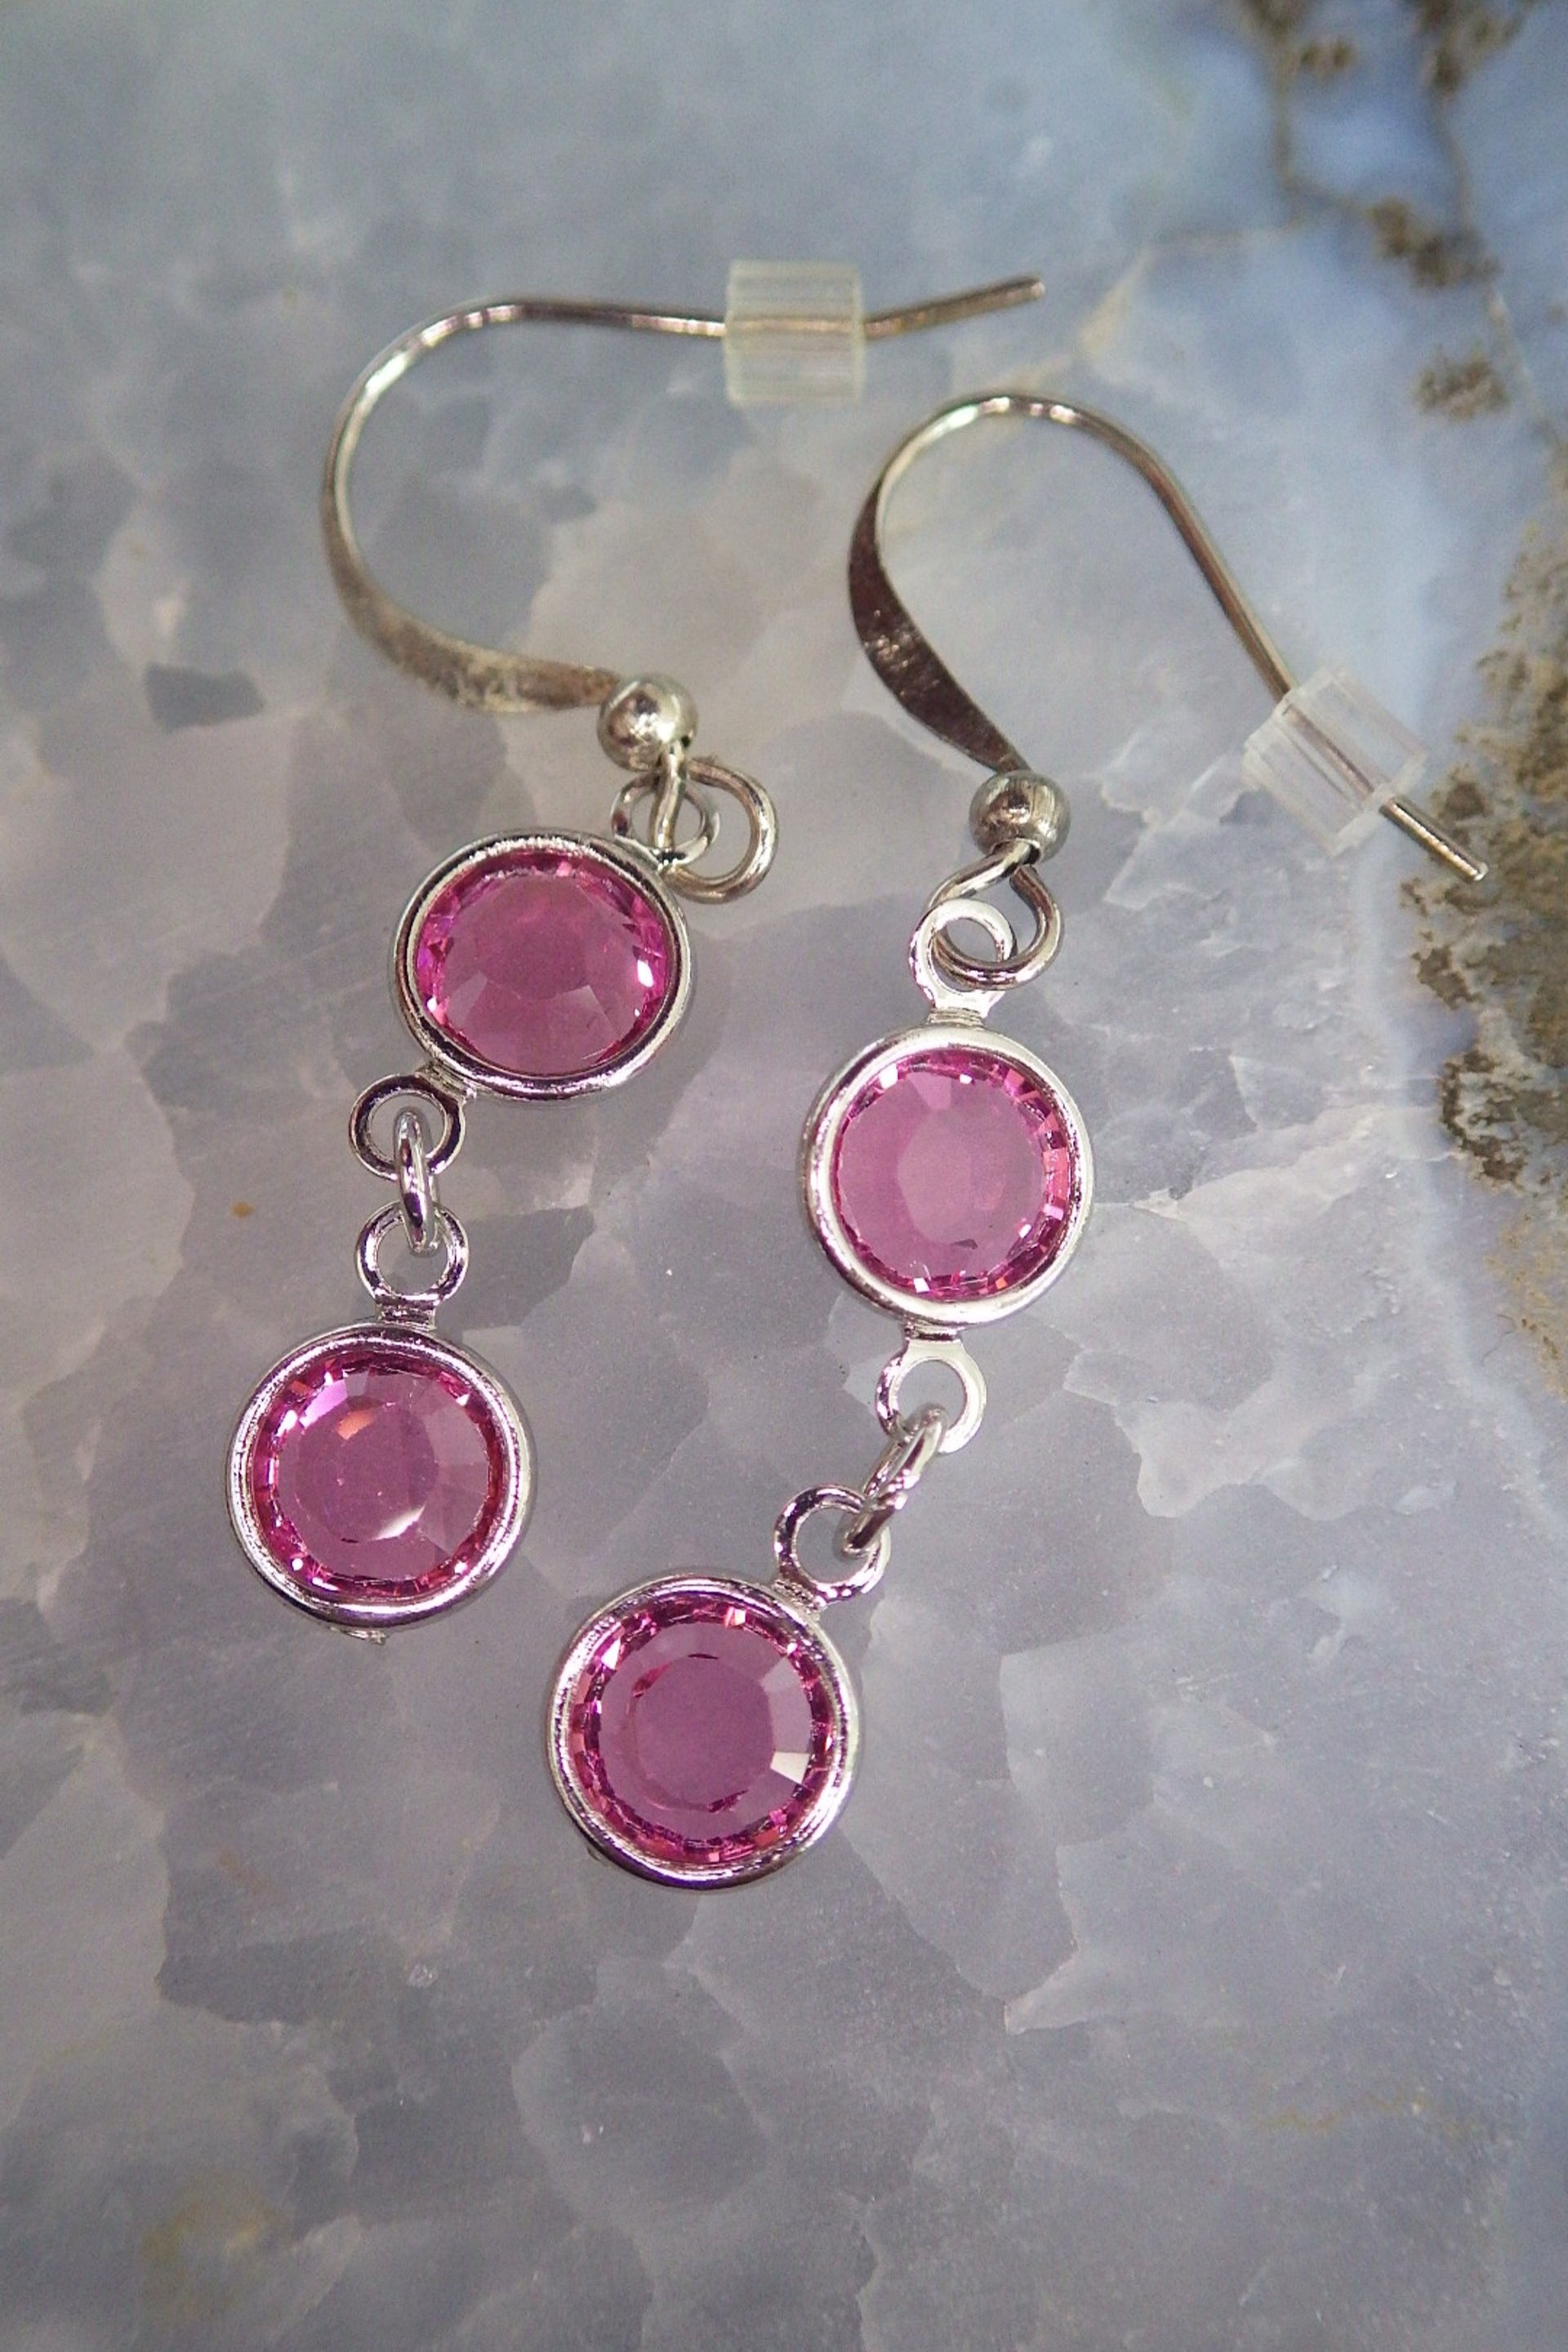  Pink Swarovski and silver findings  $12.95 